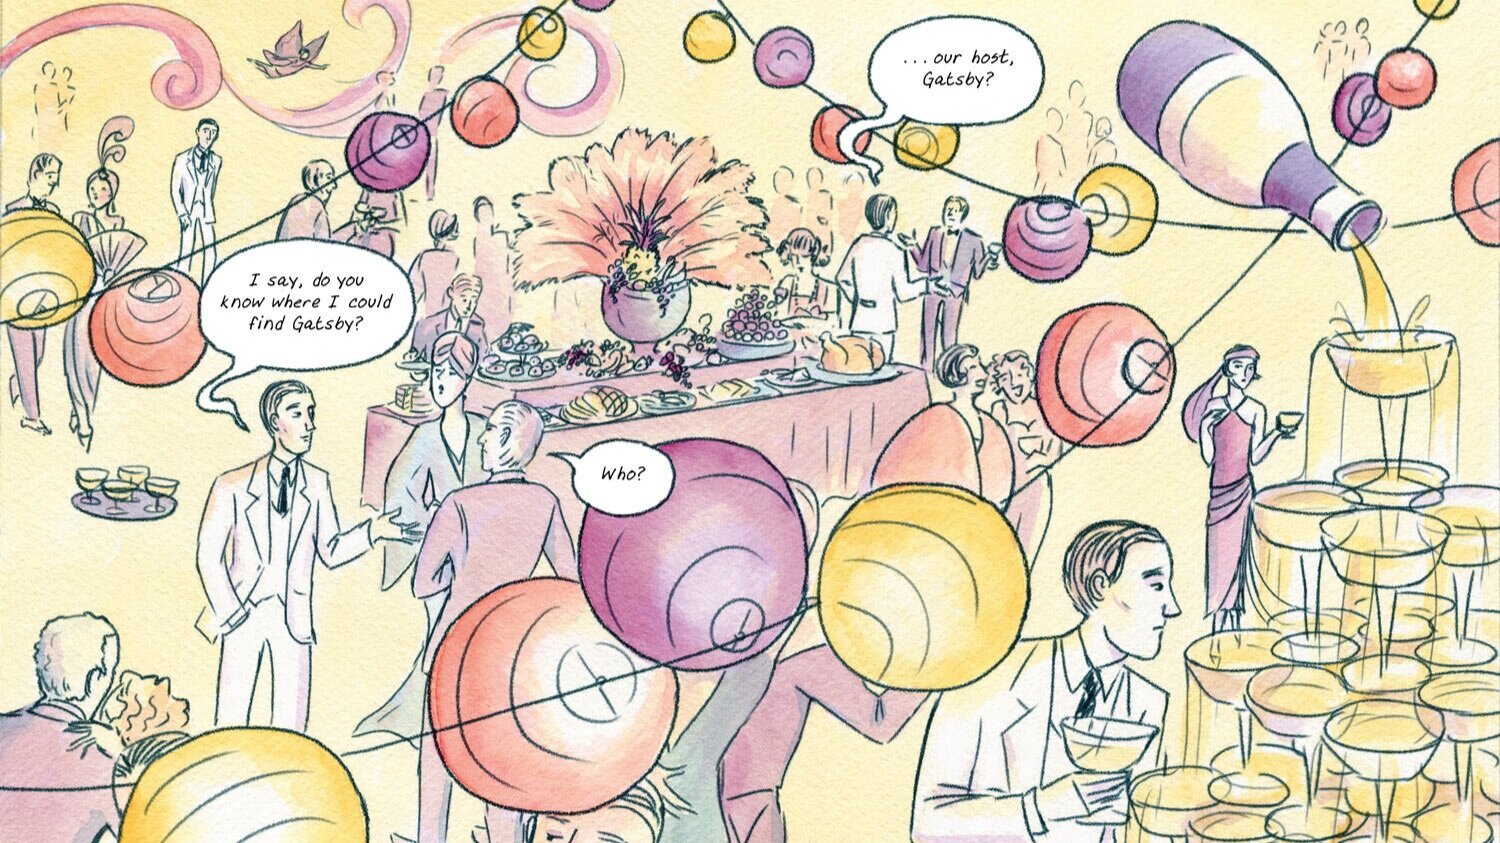 Jay Gatsby's epic party in The Great Gatsby: A Graphic Novel Adaptation by K. Woodman-Maynard